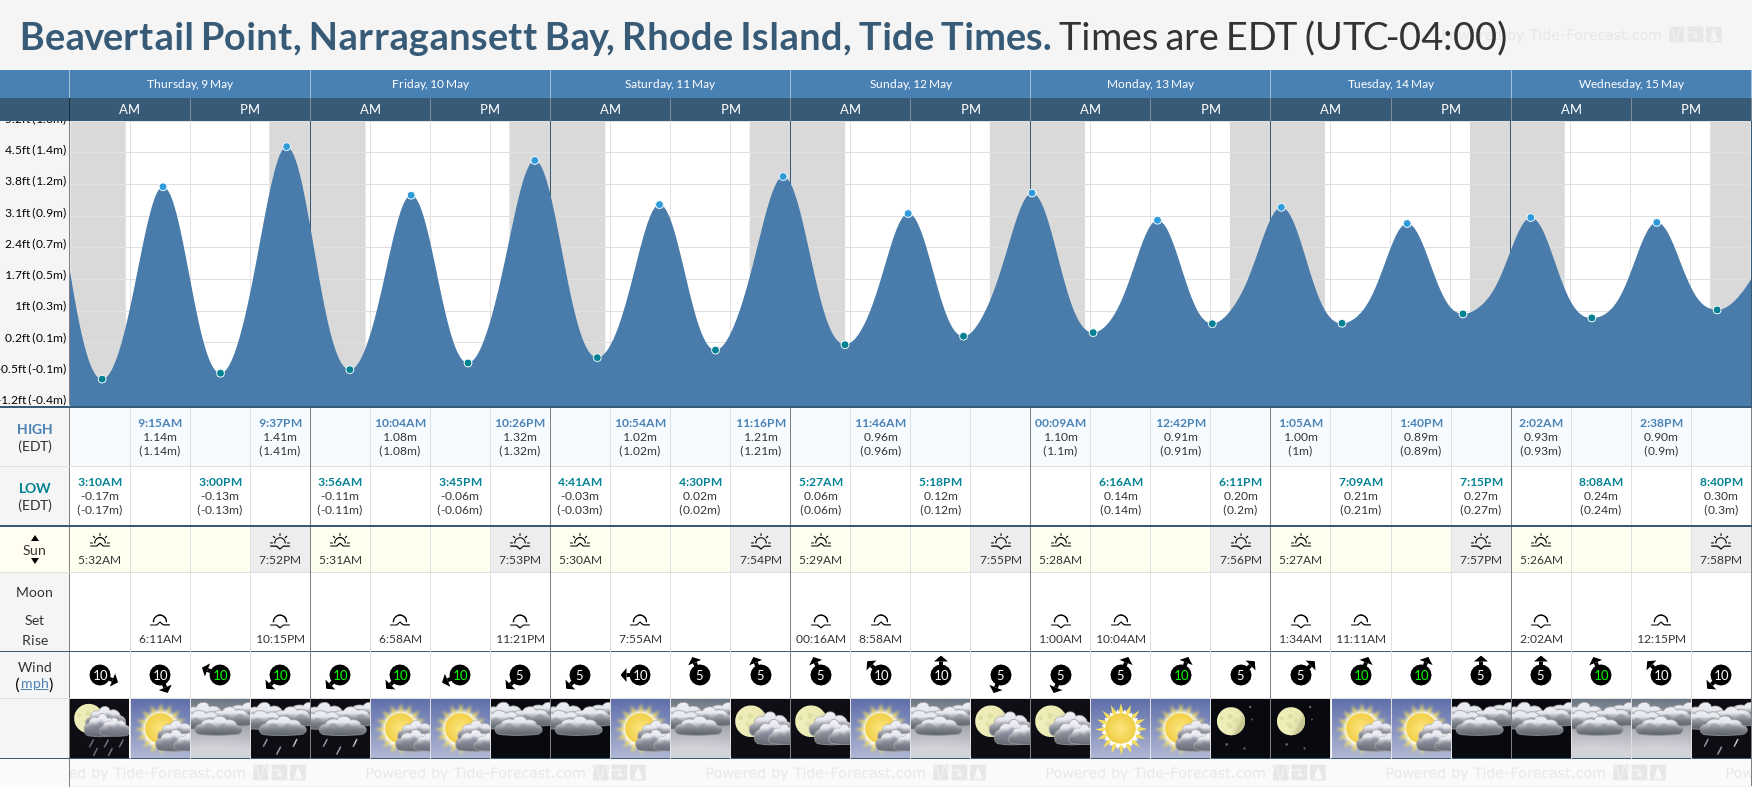 Beavertail Point, Narragansett Bay, Rhode Island Tide Chart including high and low tide tide times for the next 7 days